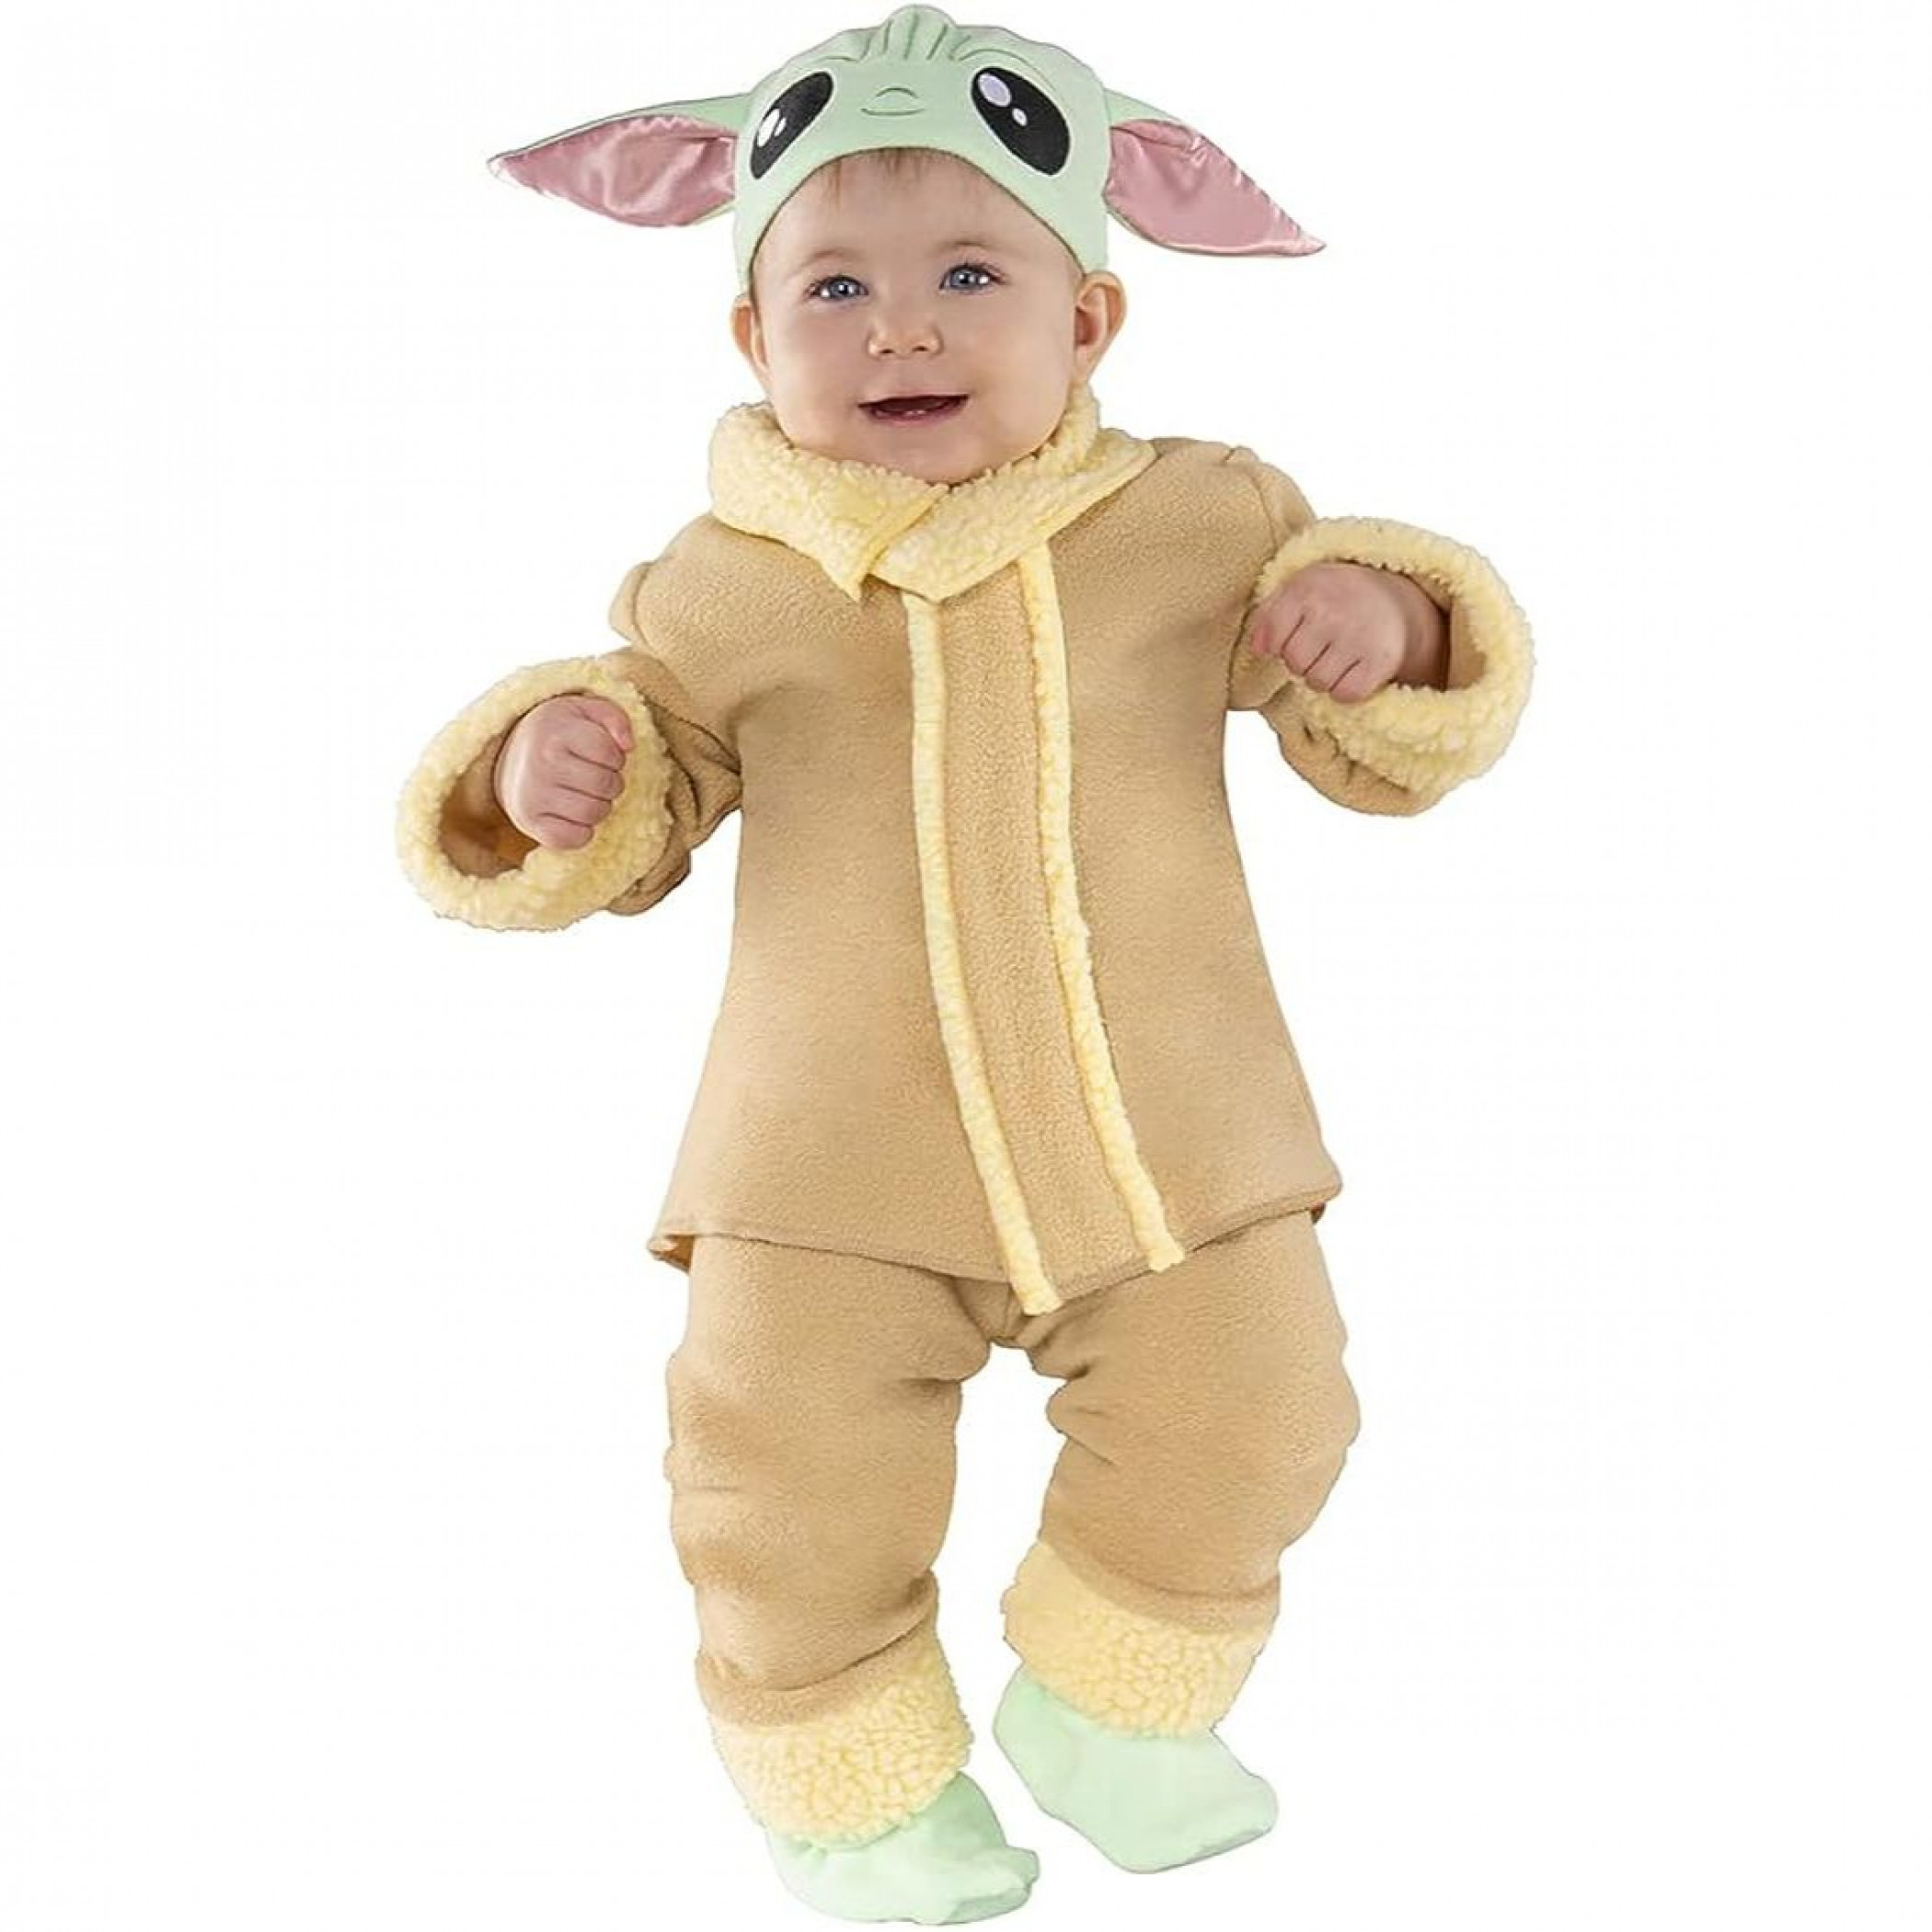 Star Wars The Mandalorian Infant Costume with Non-Slip Booties